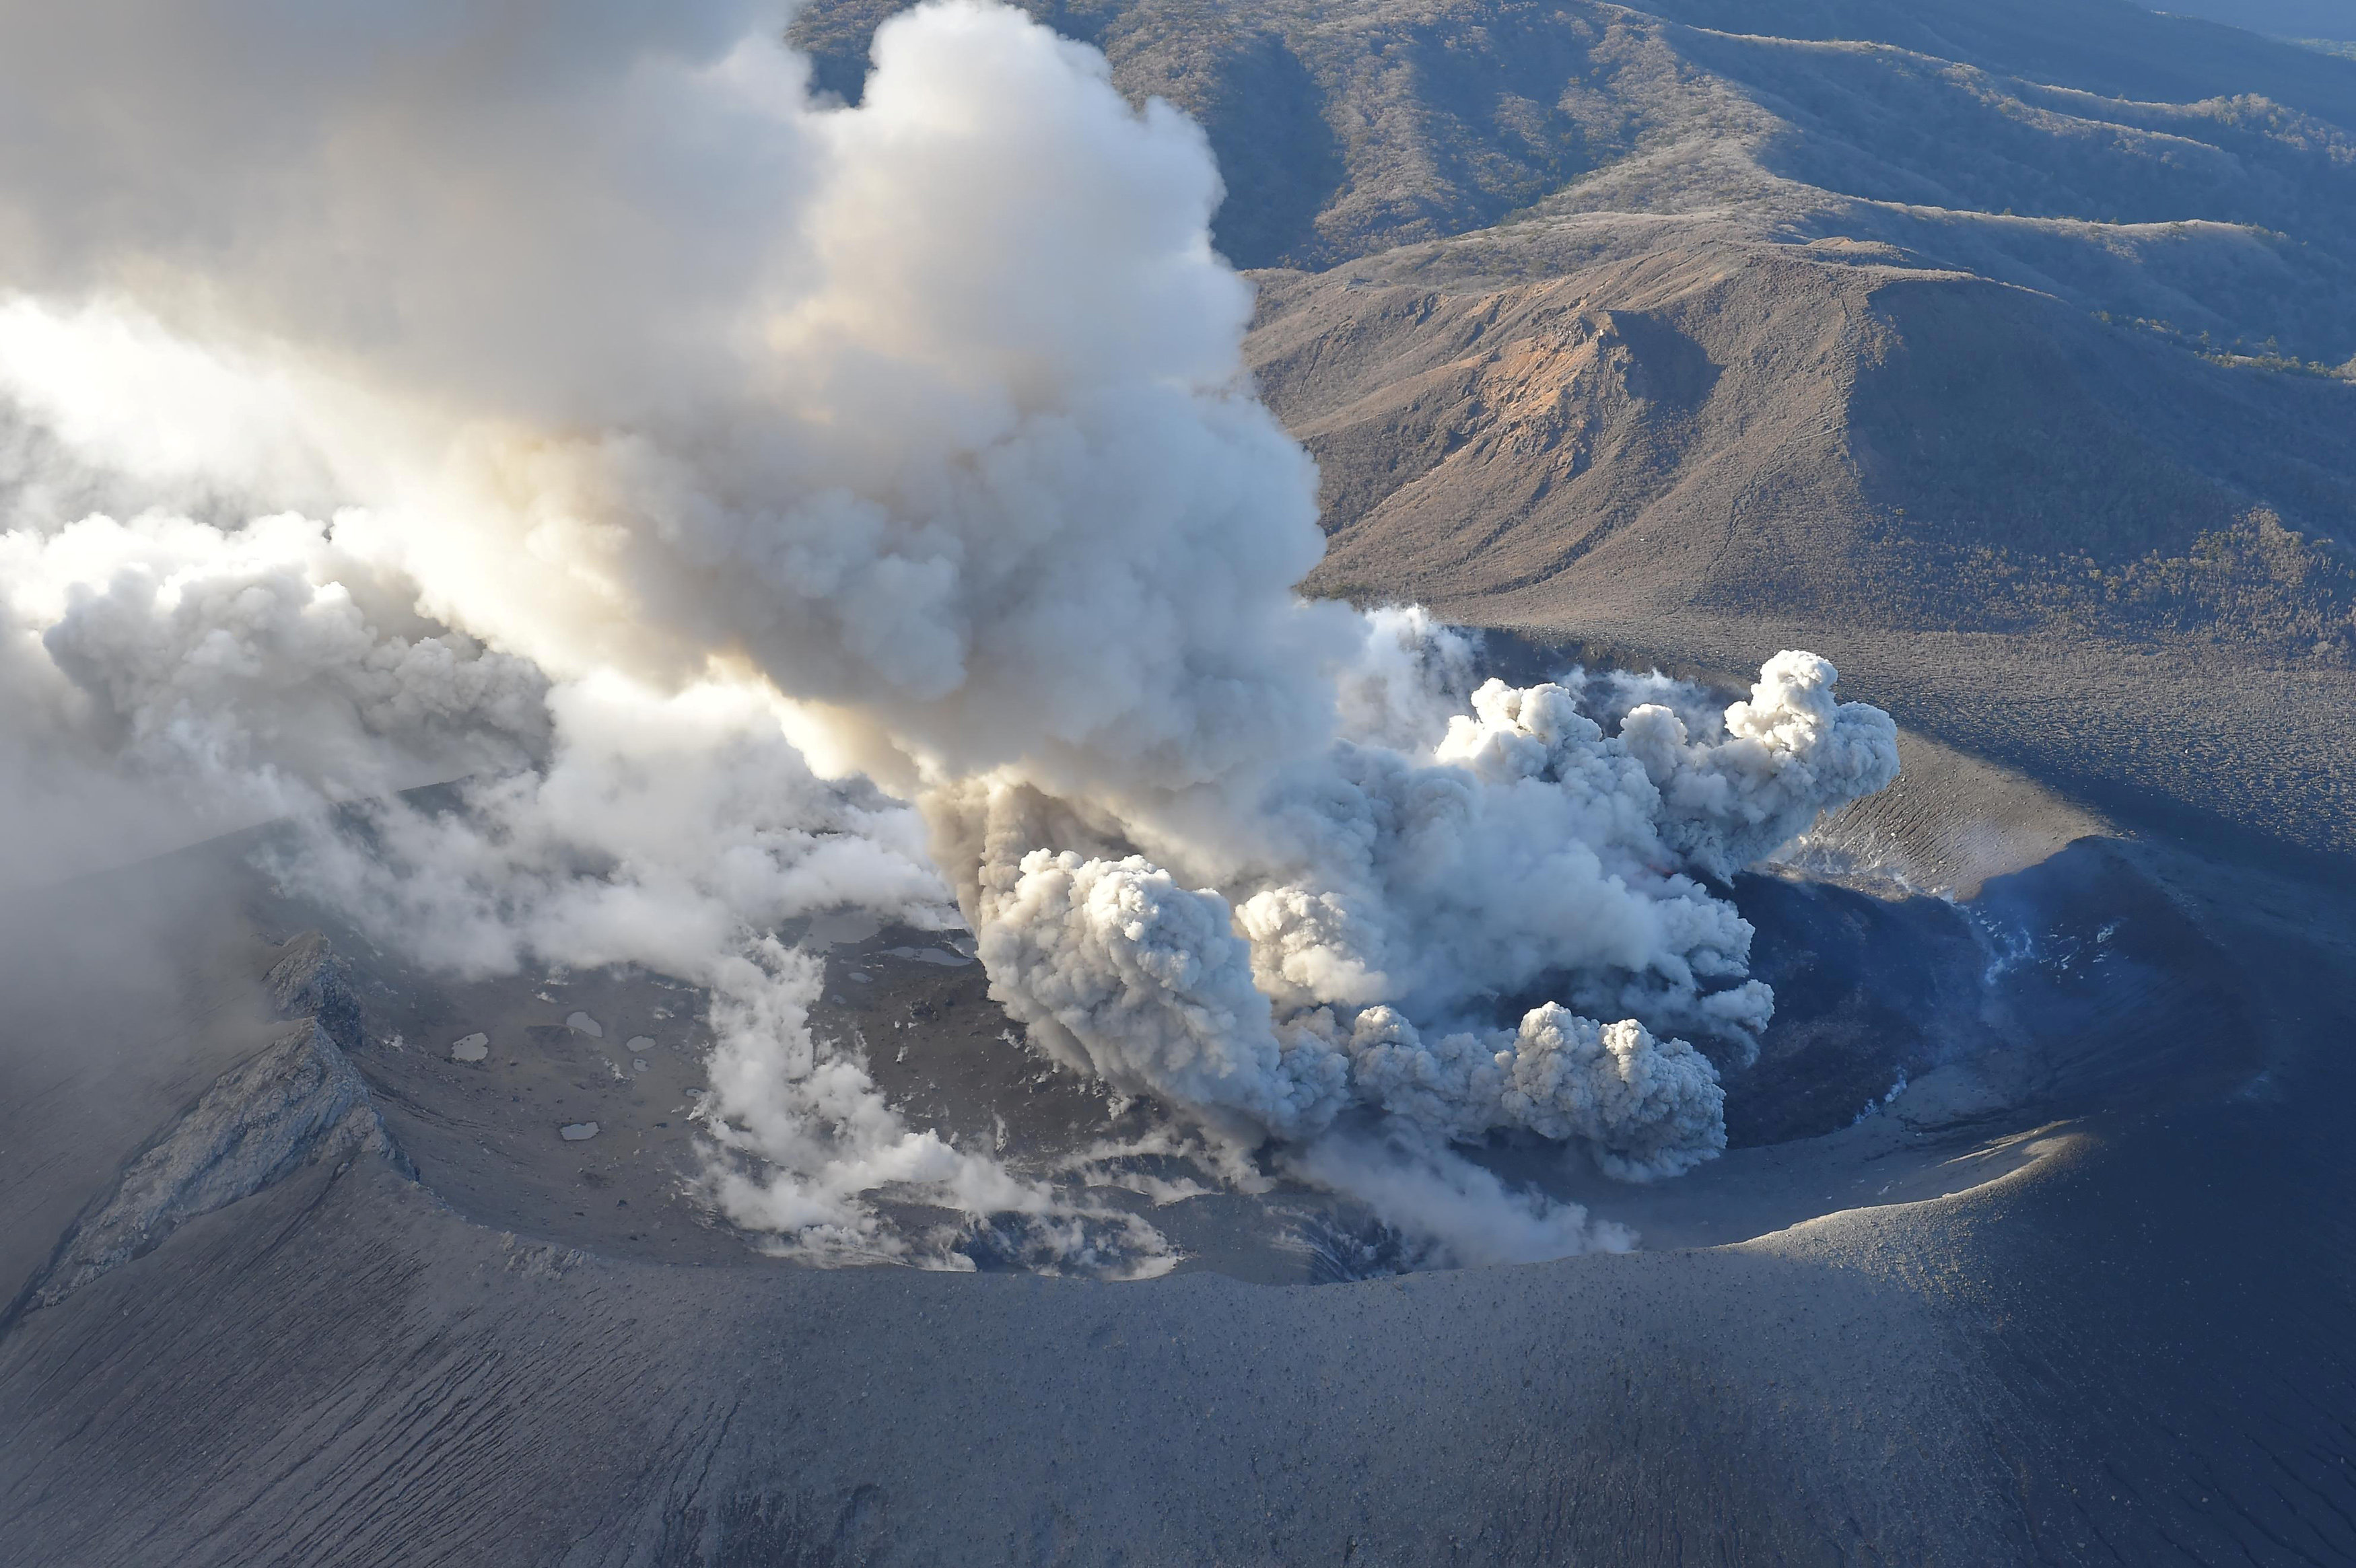 Japanese 'James Bond' Volcano Shoots to Thrill - OMG News Today